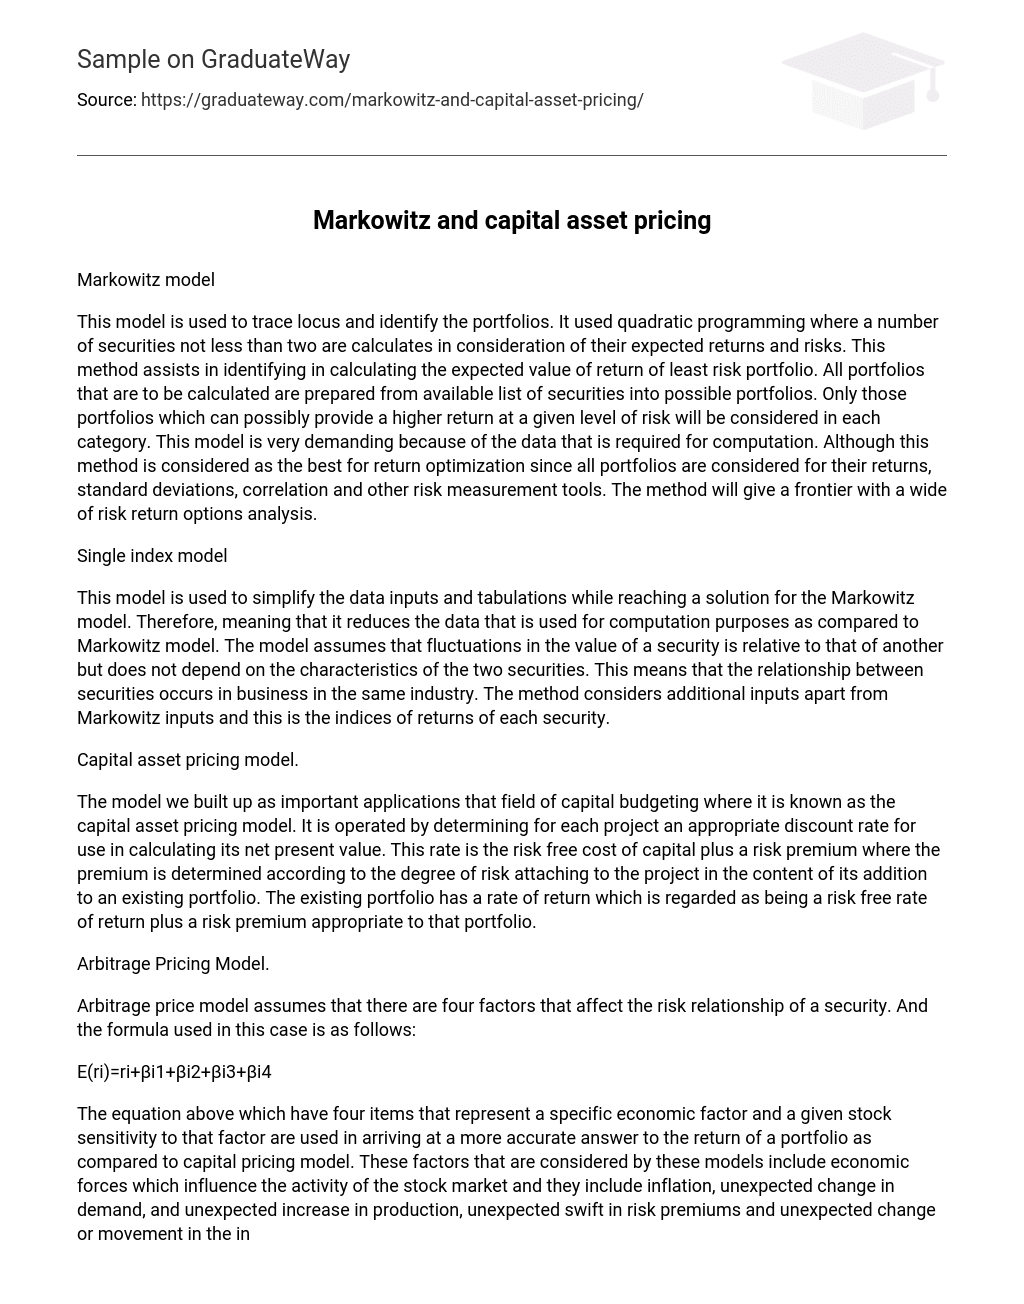 Markowitz and capital asset pricing